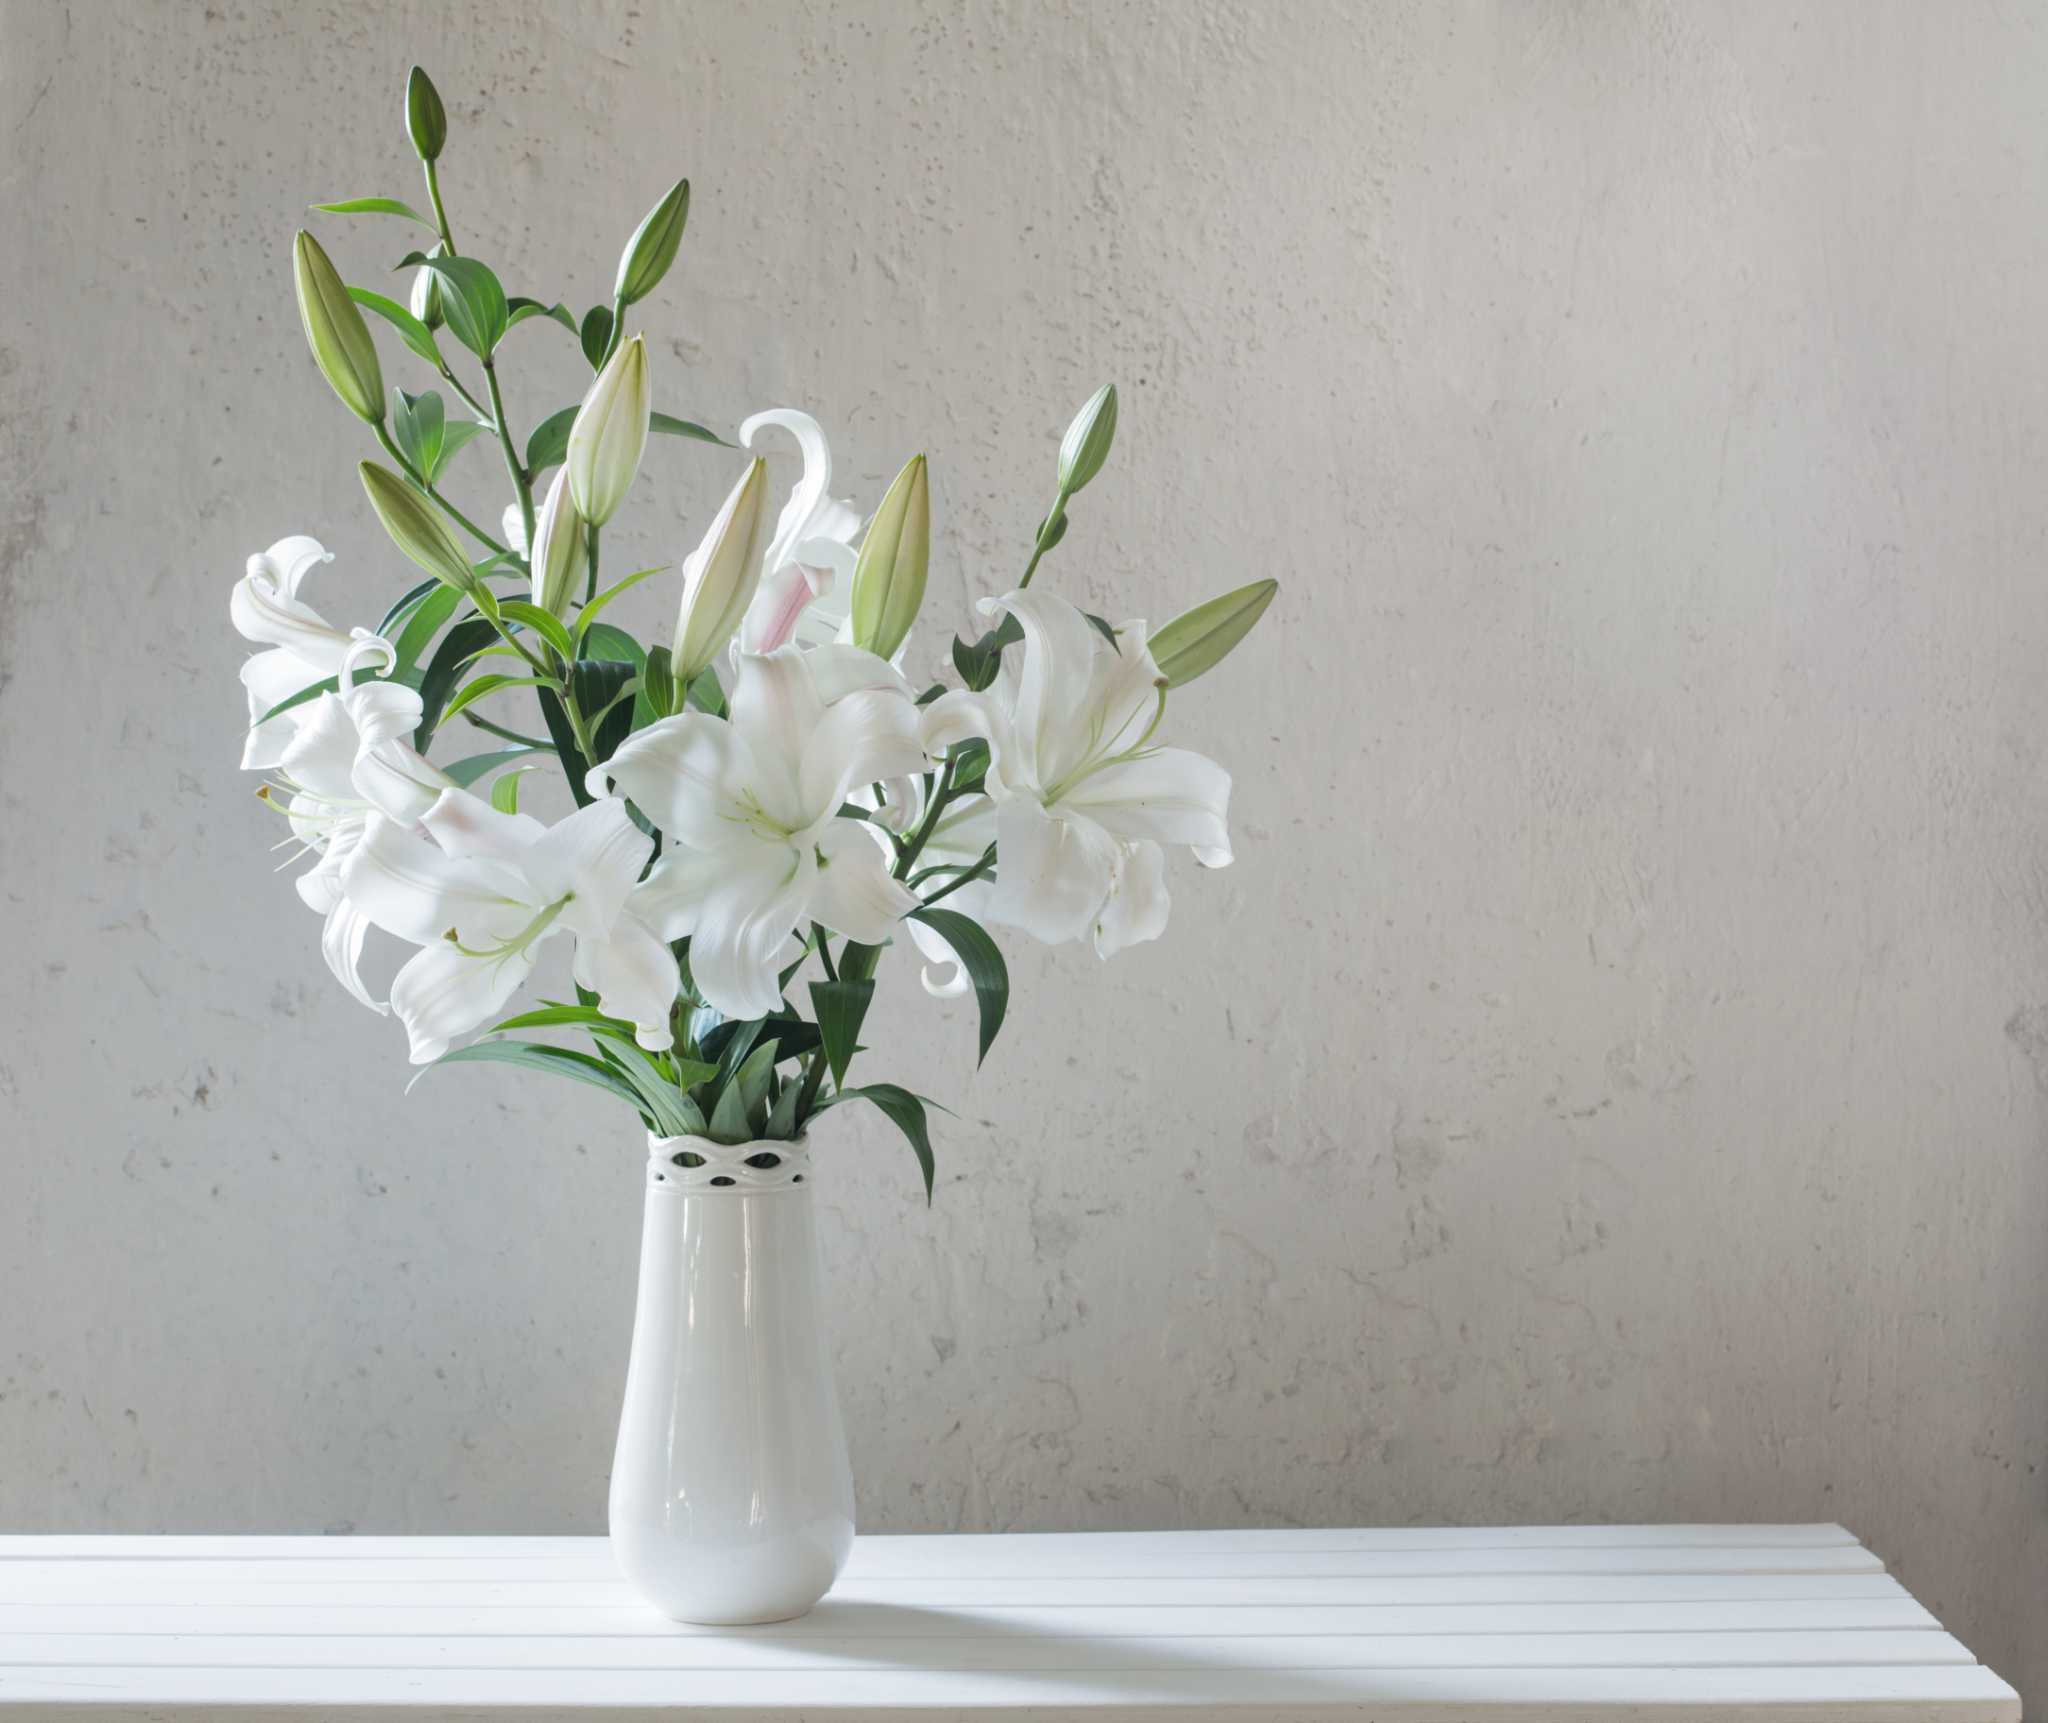 How Long Do Lilies Take To Bloom In Vase